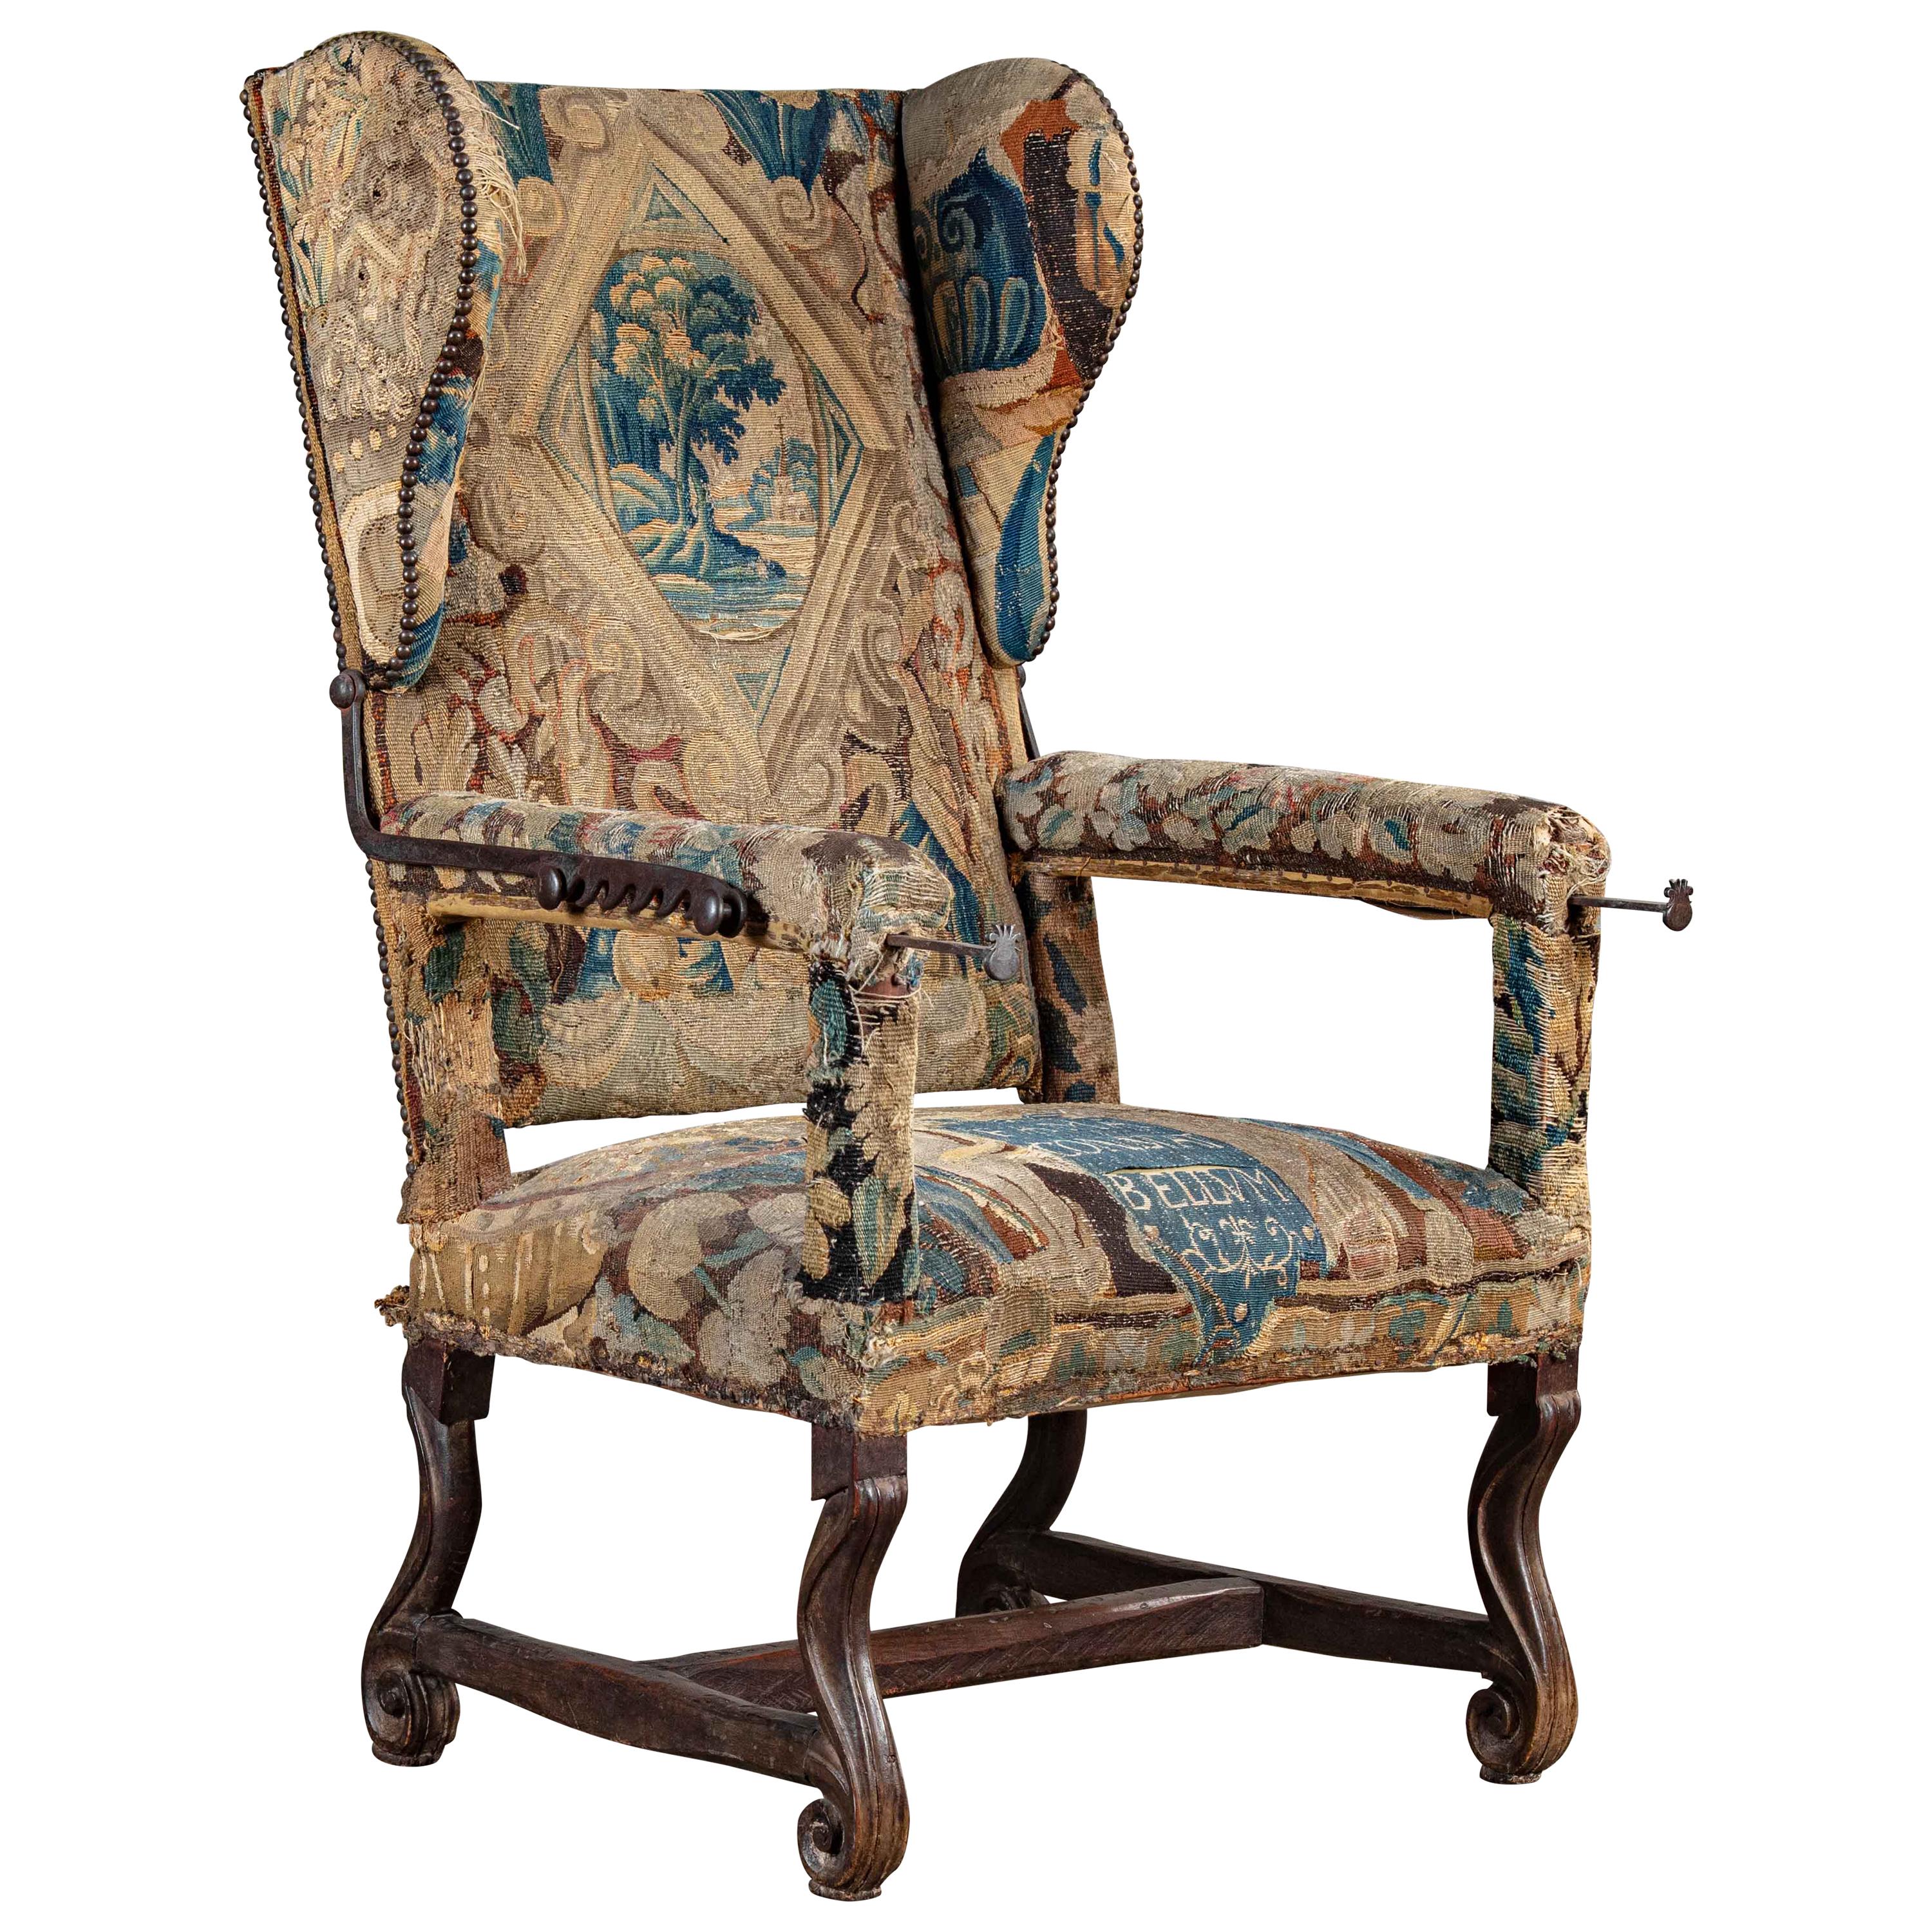 What is the difference between a fauteuil and a bergere?